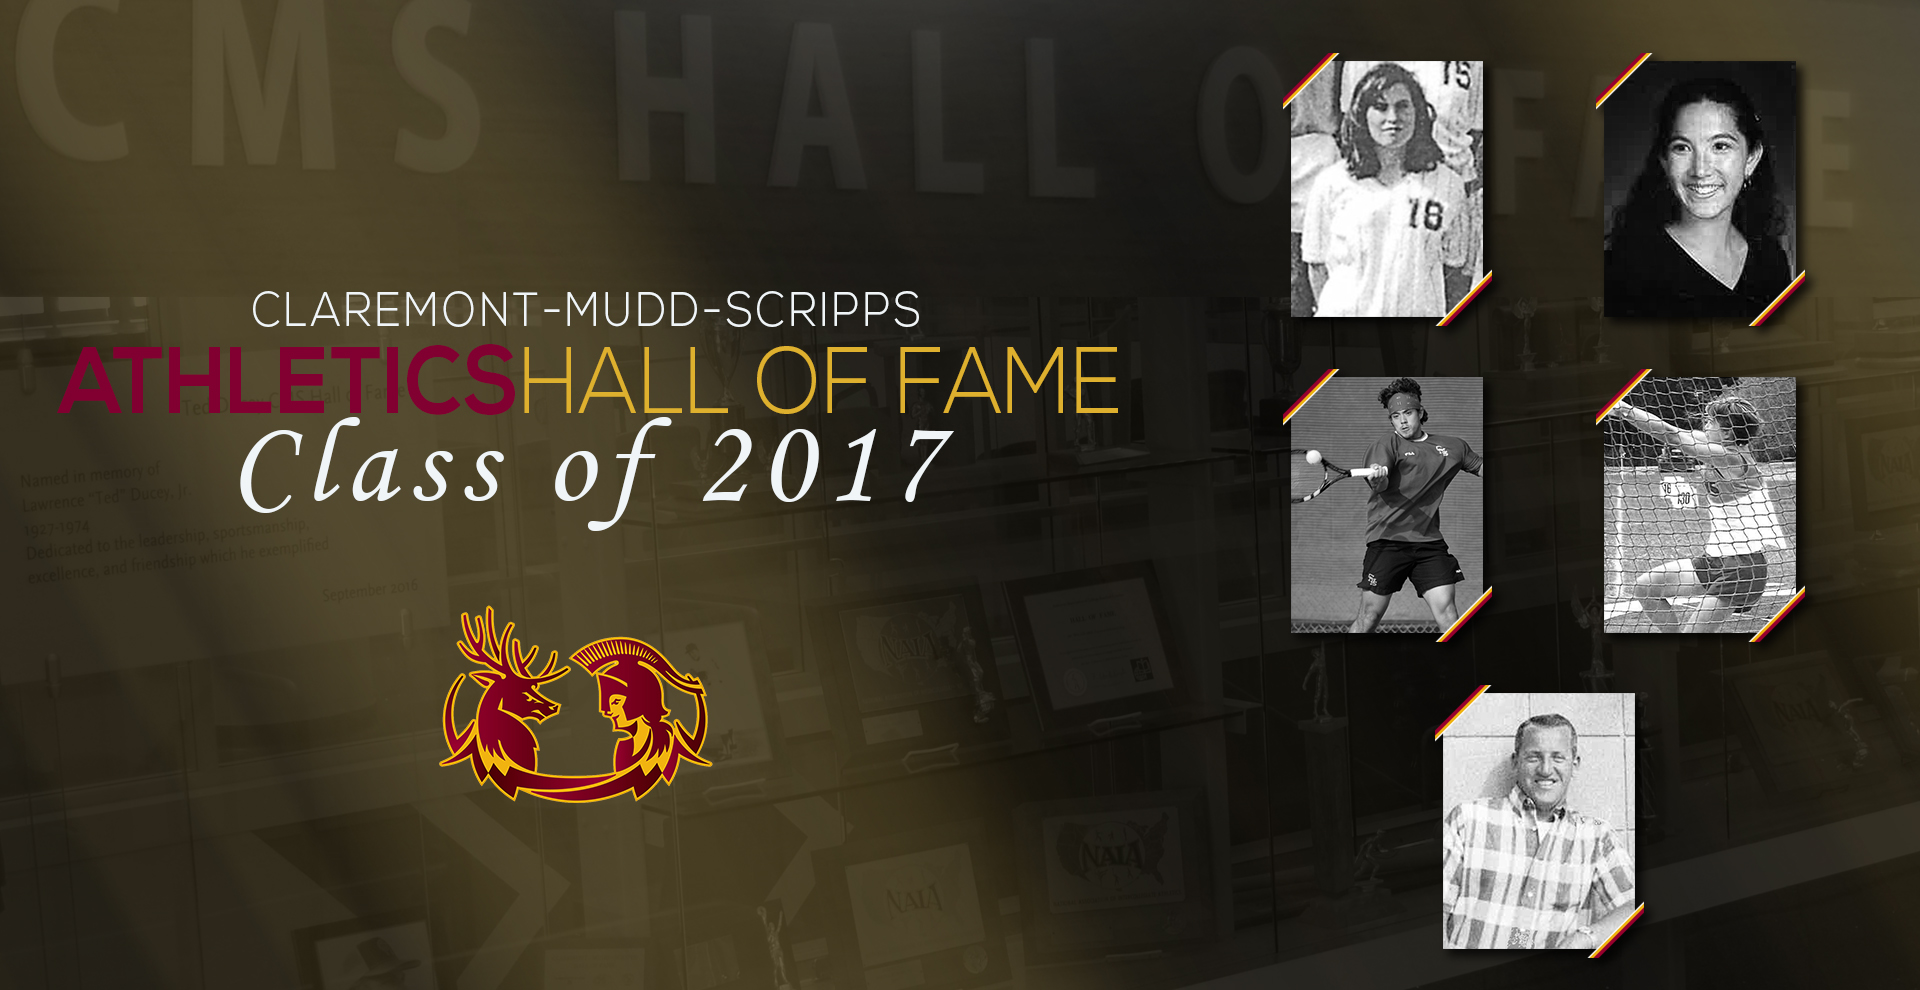 Five decades of greatness represented in the 2017 CMS Hall of Fame class